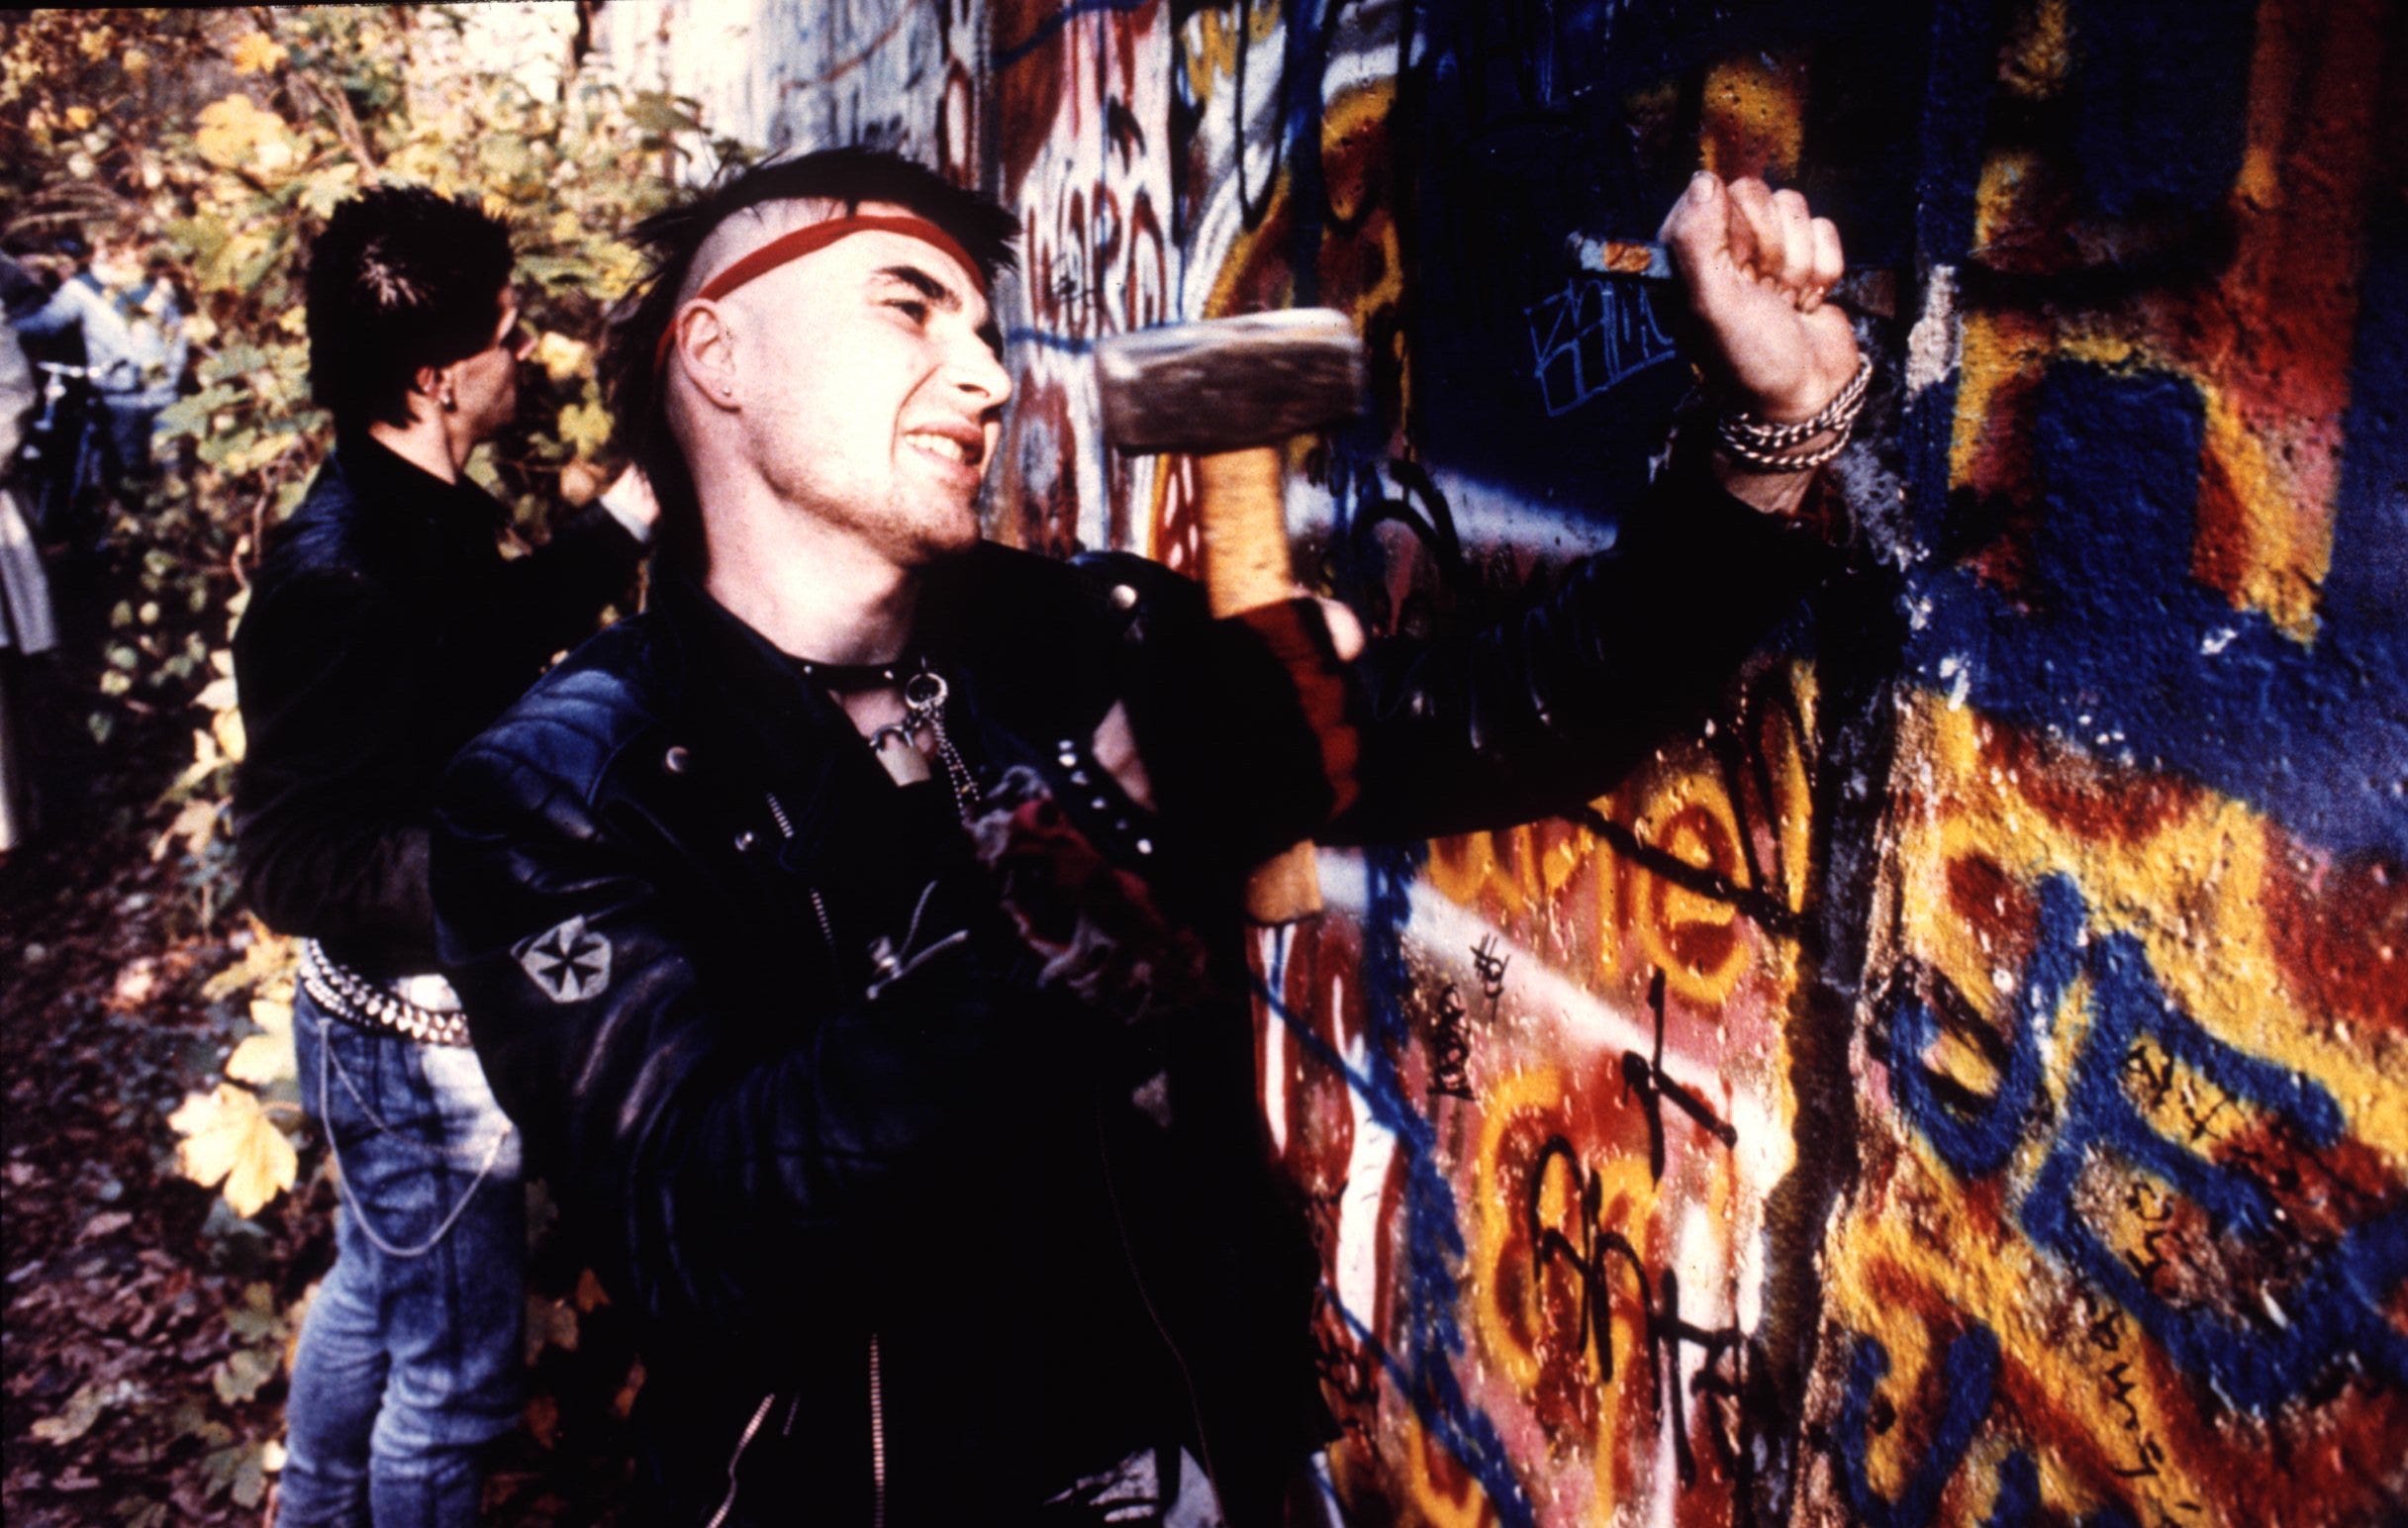 A West German takes hammer and chisel to the Berlin Wall on Nov. 11, 1989, in the midst of the euphoria that reigned for days after East German authorities opened the gates on Nov. 9. The wall, which was erected in 1961, became the ultimate symbol of the Iron Curtain dividing Eastern Europe from the West. The wall's fall was hailed around the world as a victory for freedom and democracy.